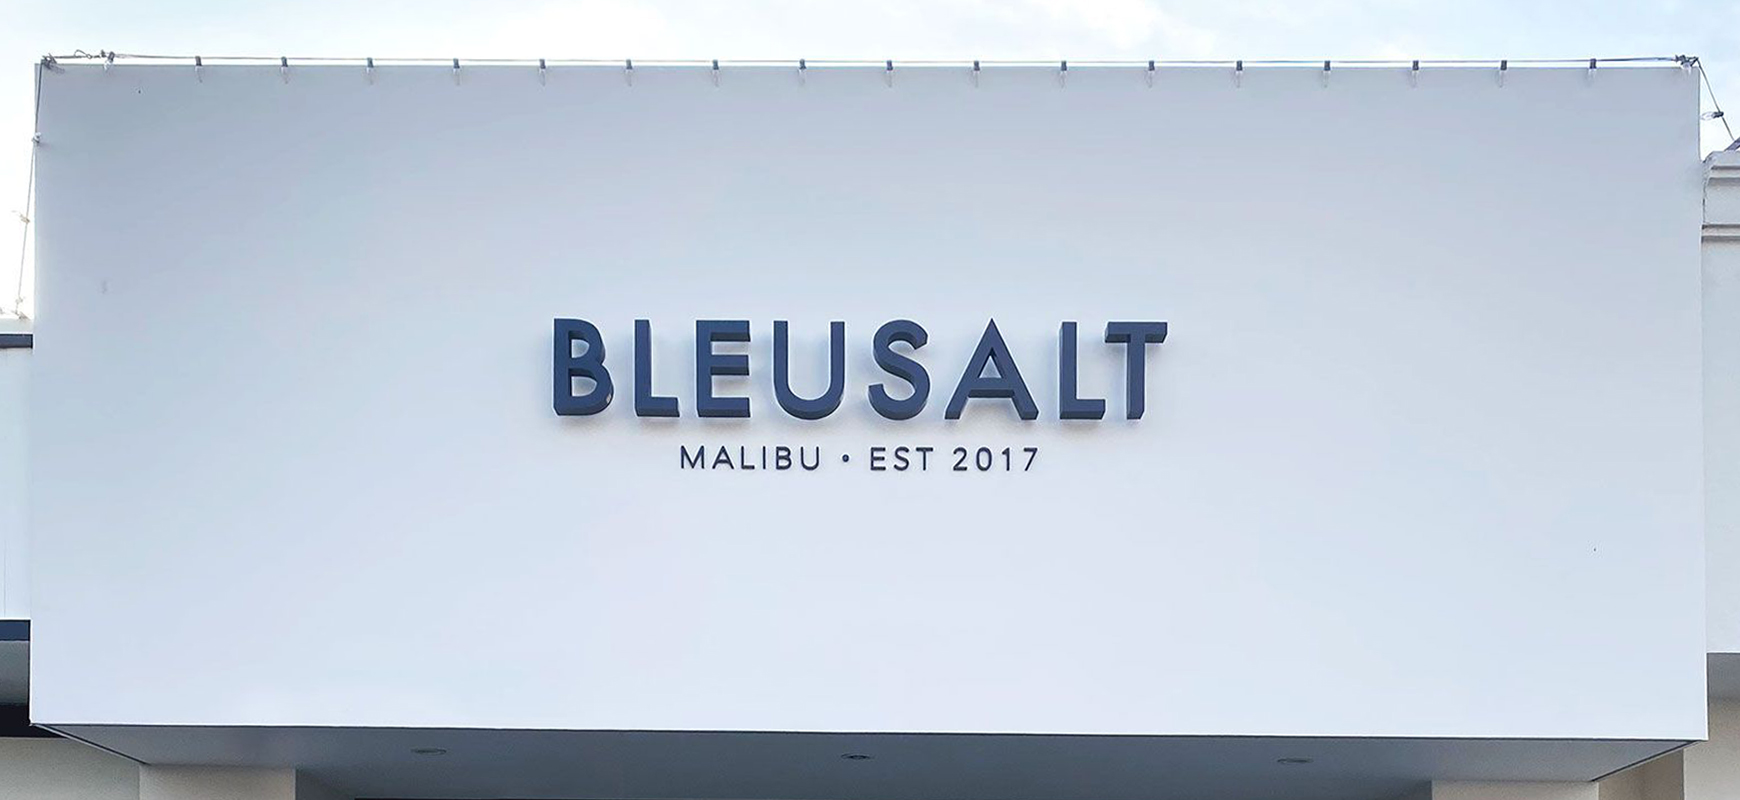 Bluesalt outdoor building signage with 3d brand name letters made of aluminum and acrylic